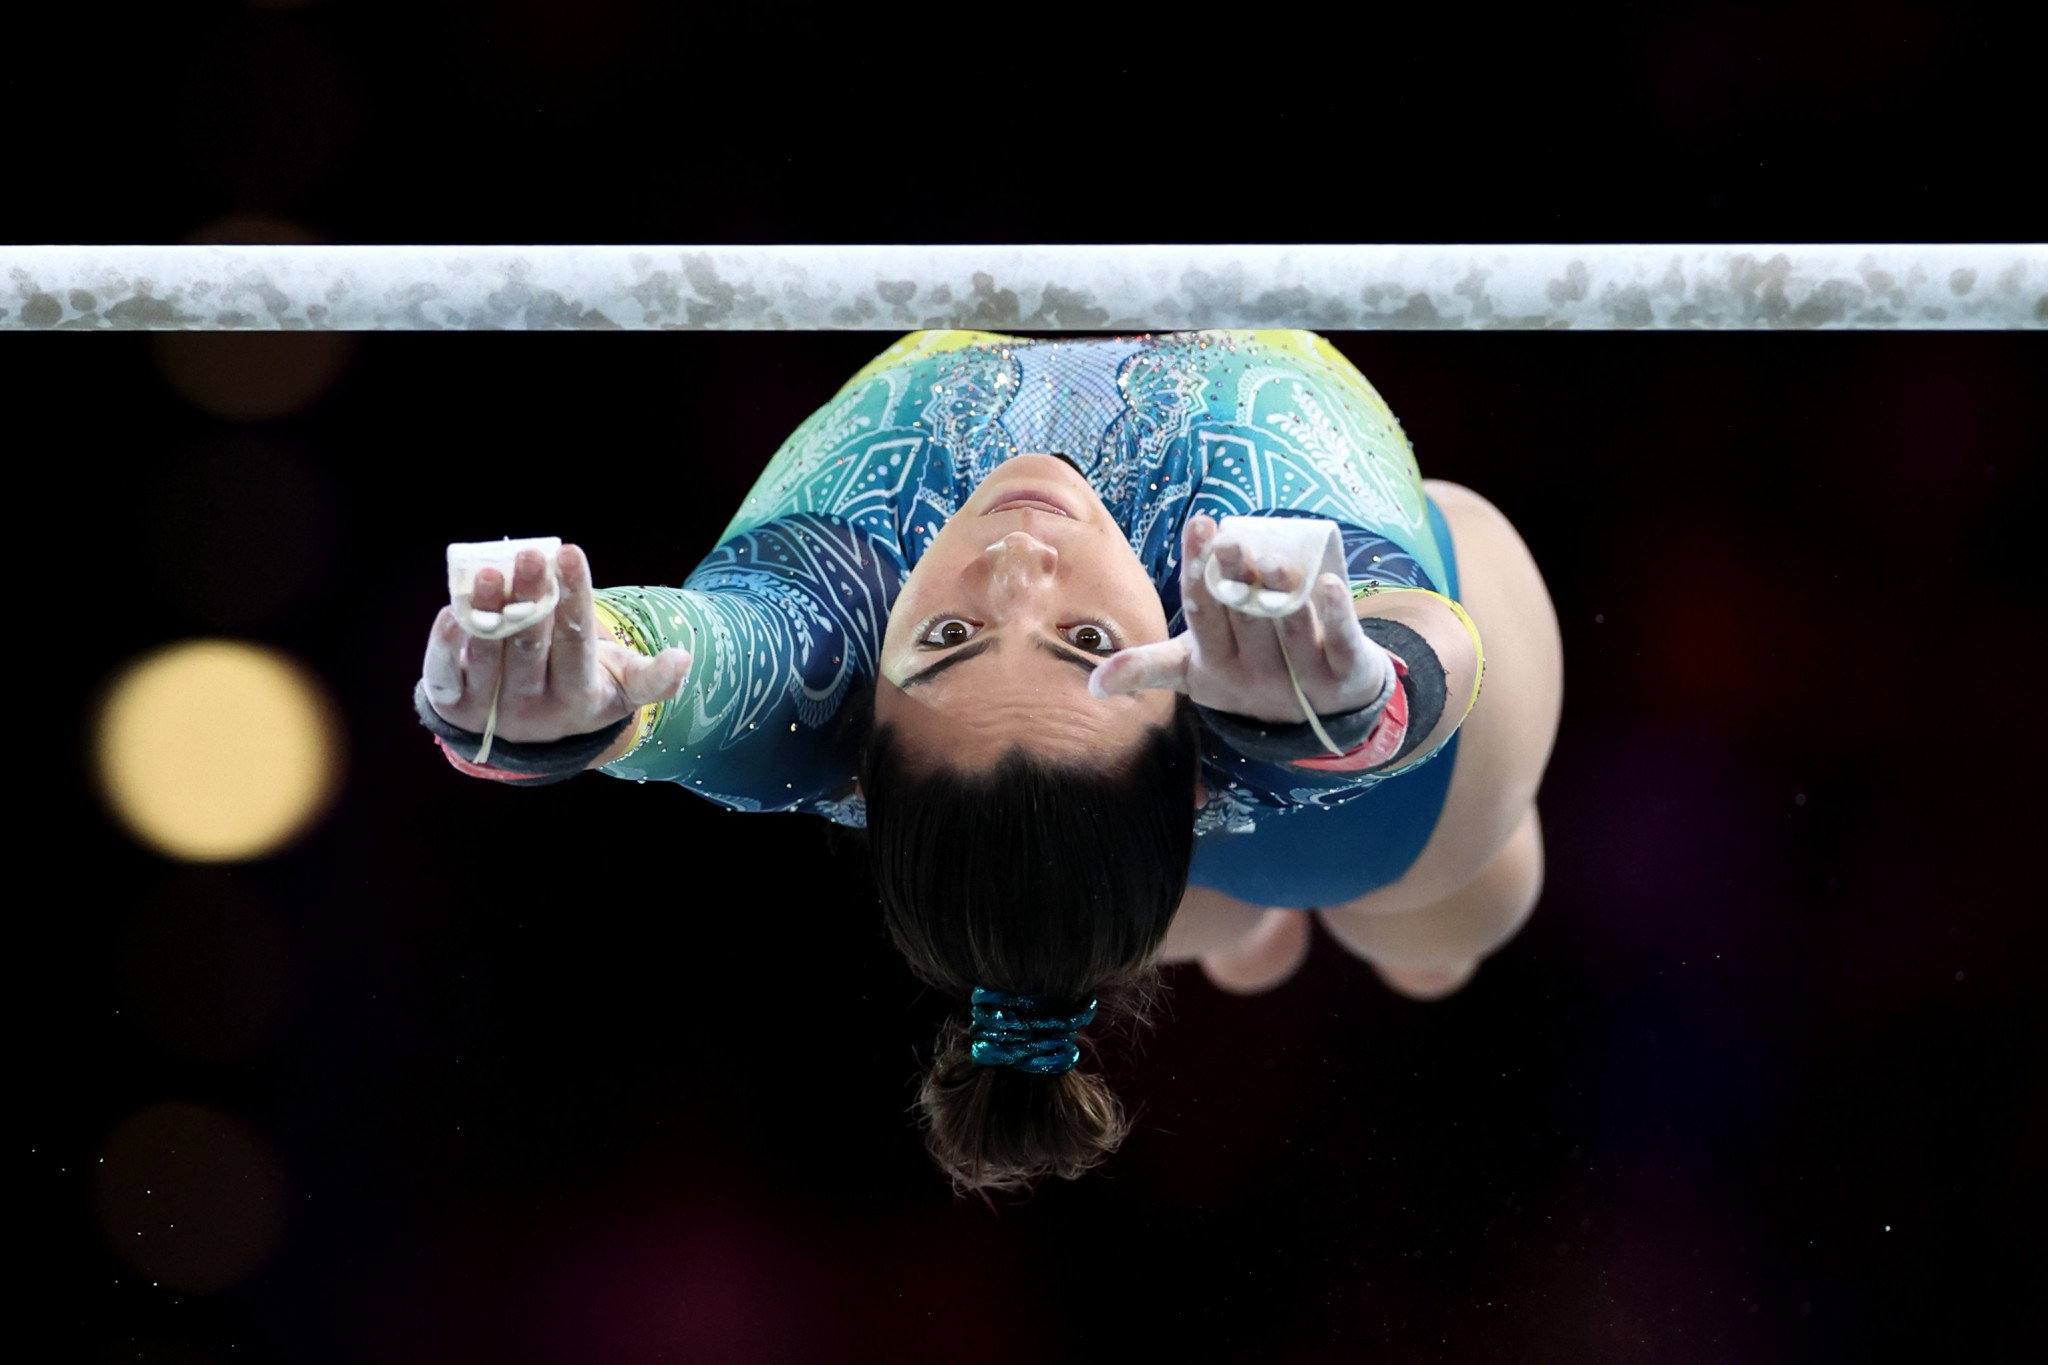 Outstanding Australian gymnast Georgia Godwin added two more medals - vault gold and uneven bars silver ©Getty Images